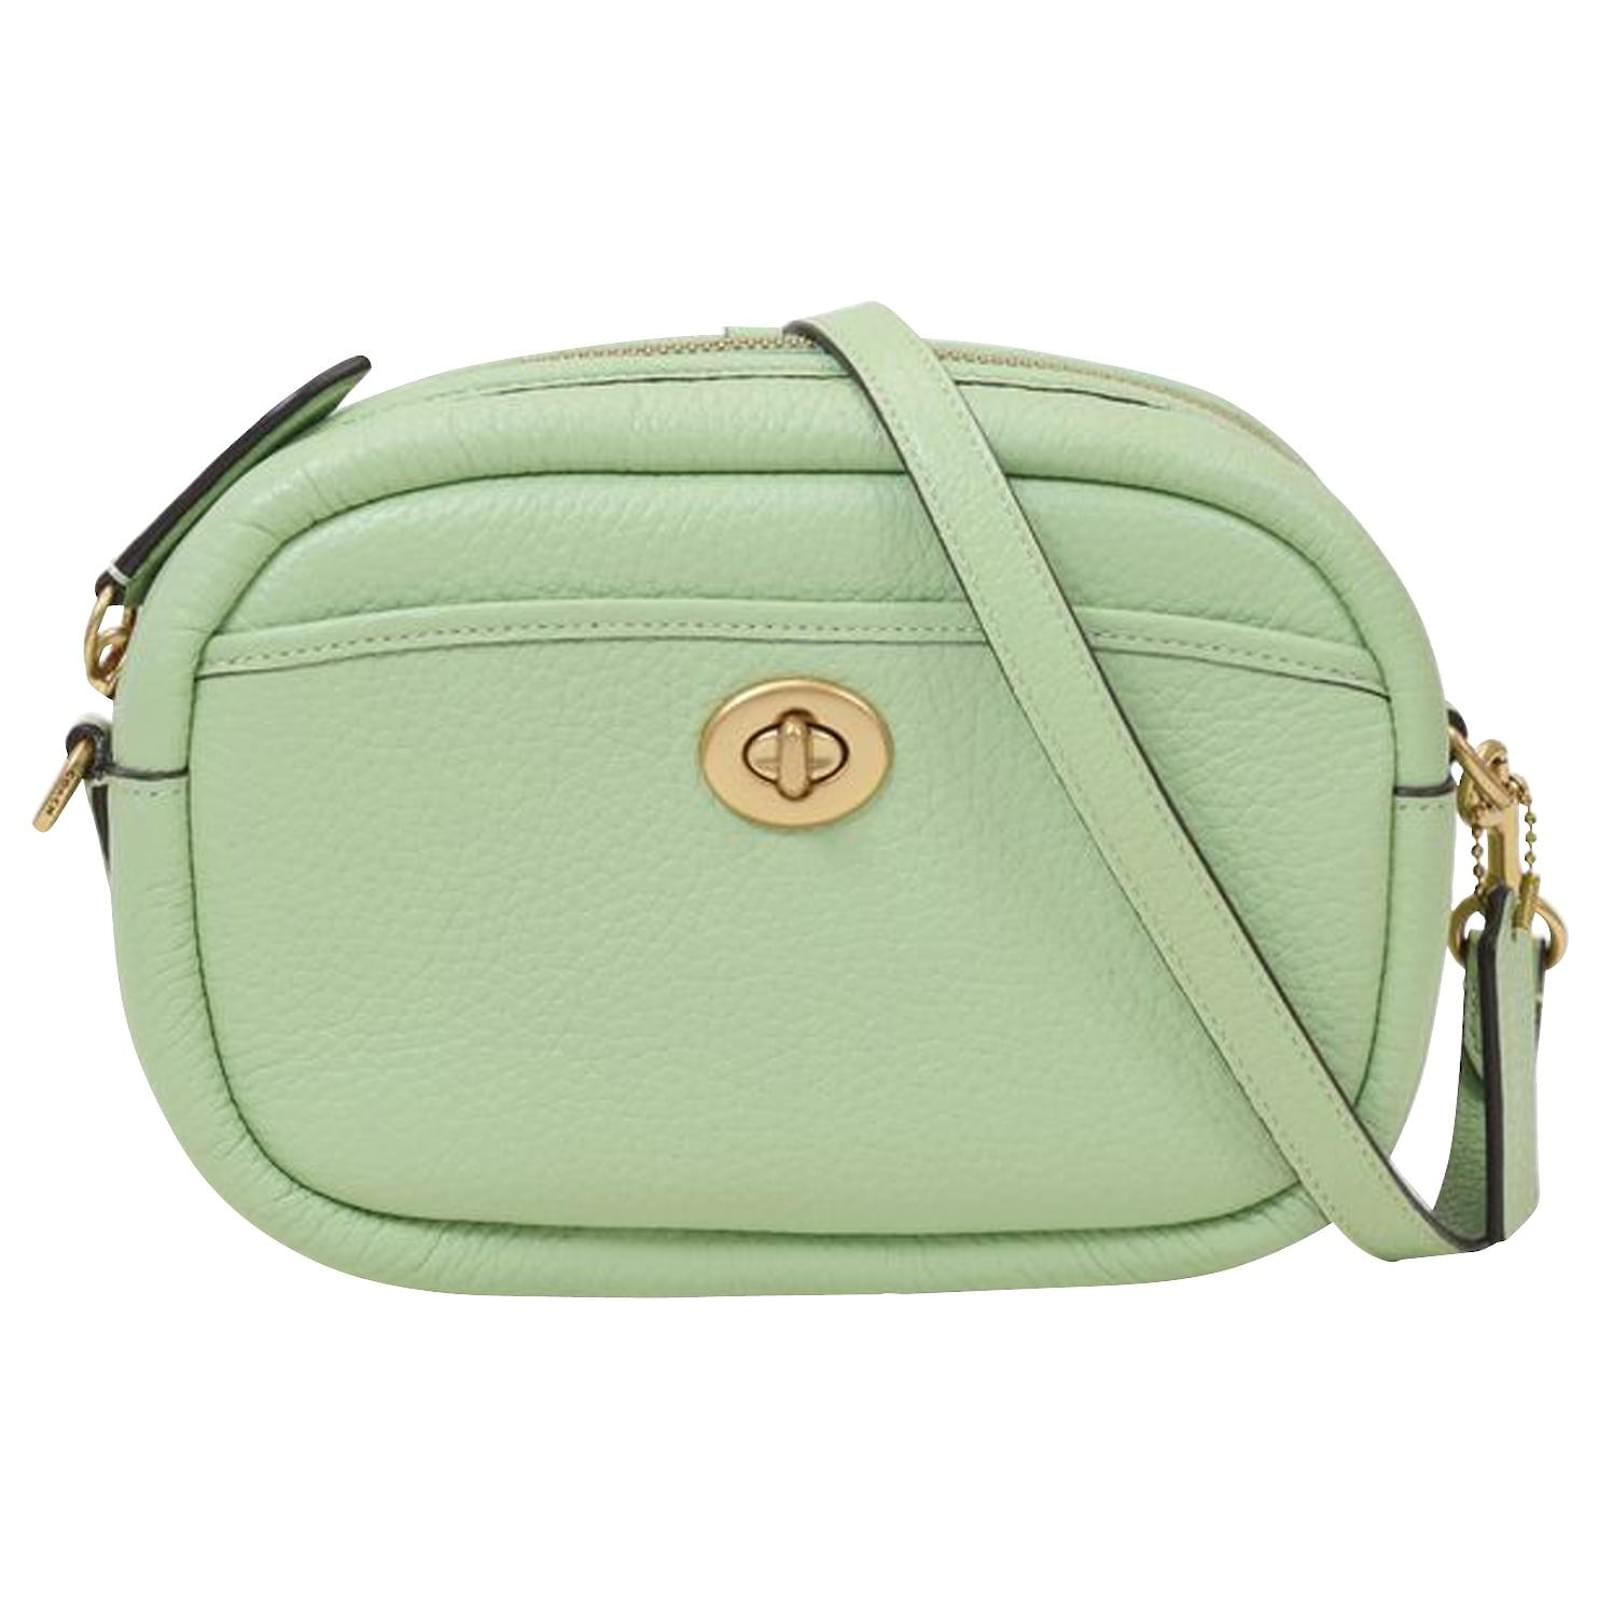 Coach Crossbody Pouch Camera Bag in Pebbled Leather - What Fits? 